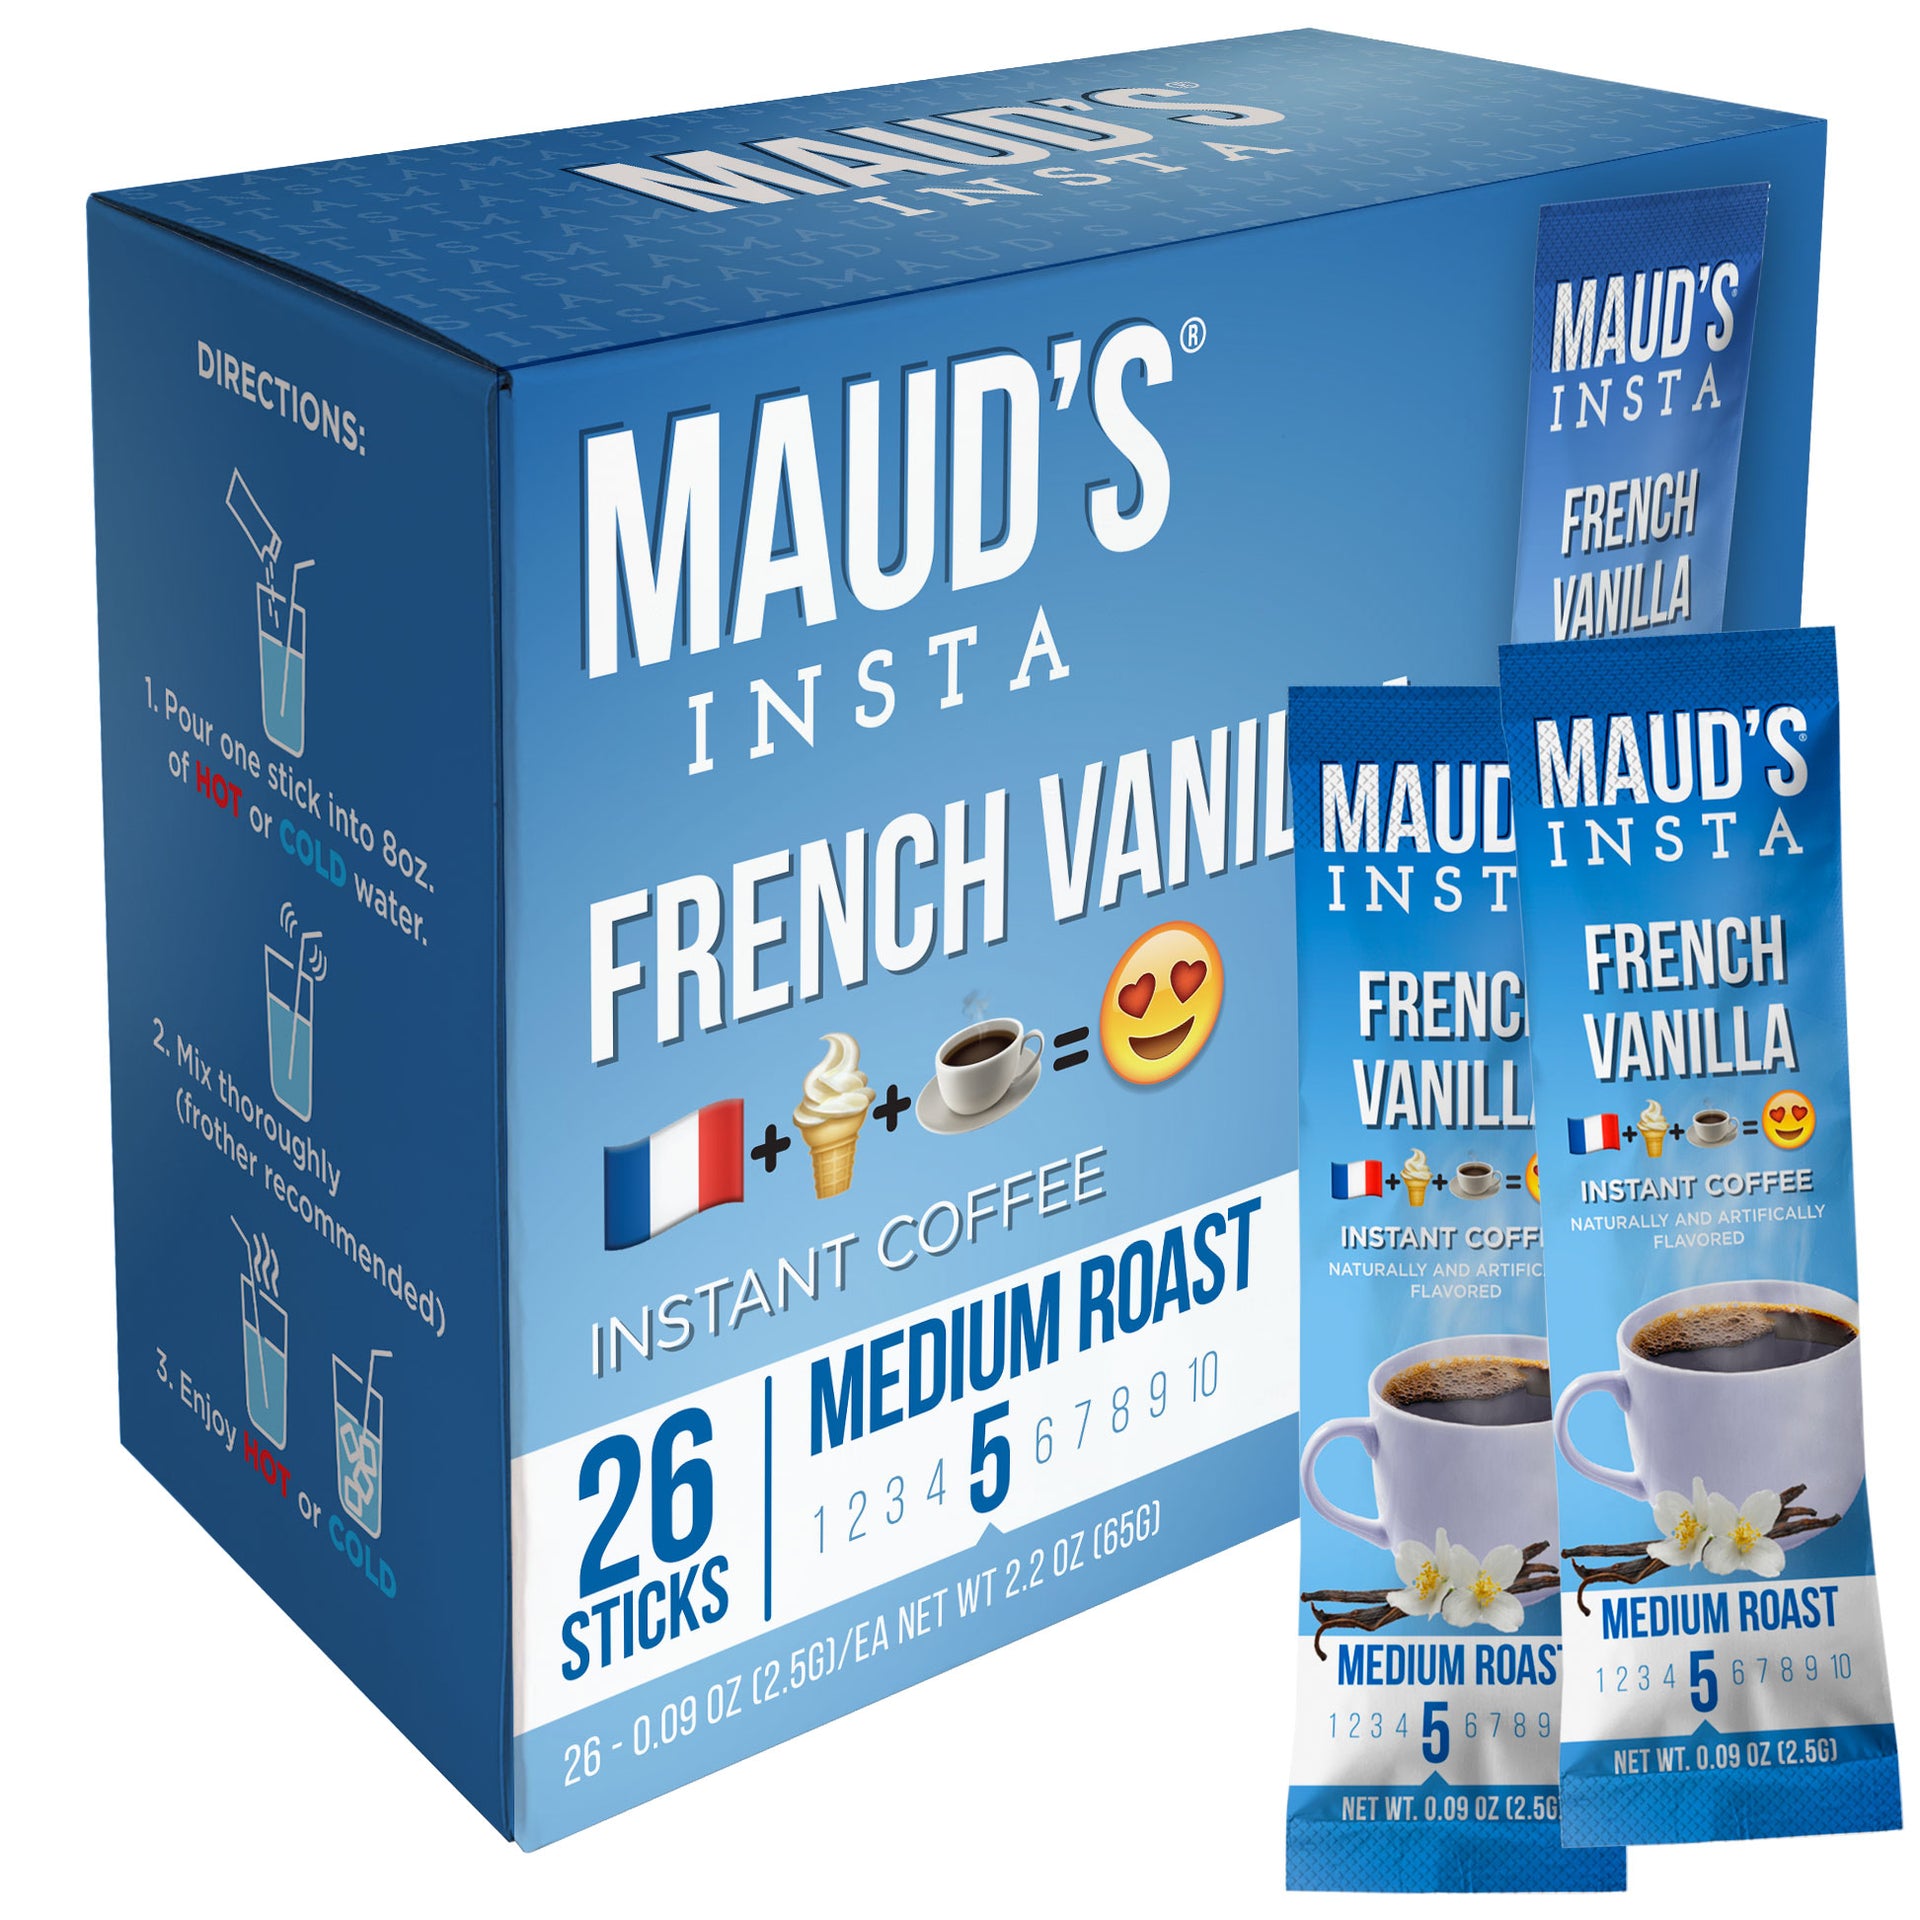 Maud's Instant French Vanilla Flavored Coffee